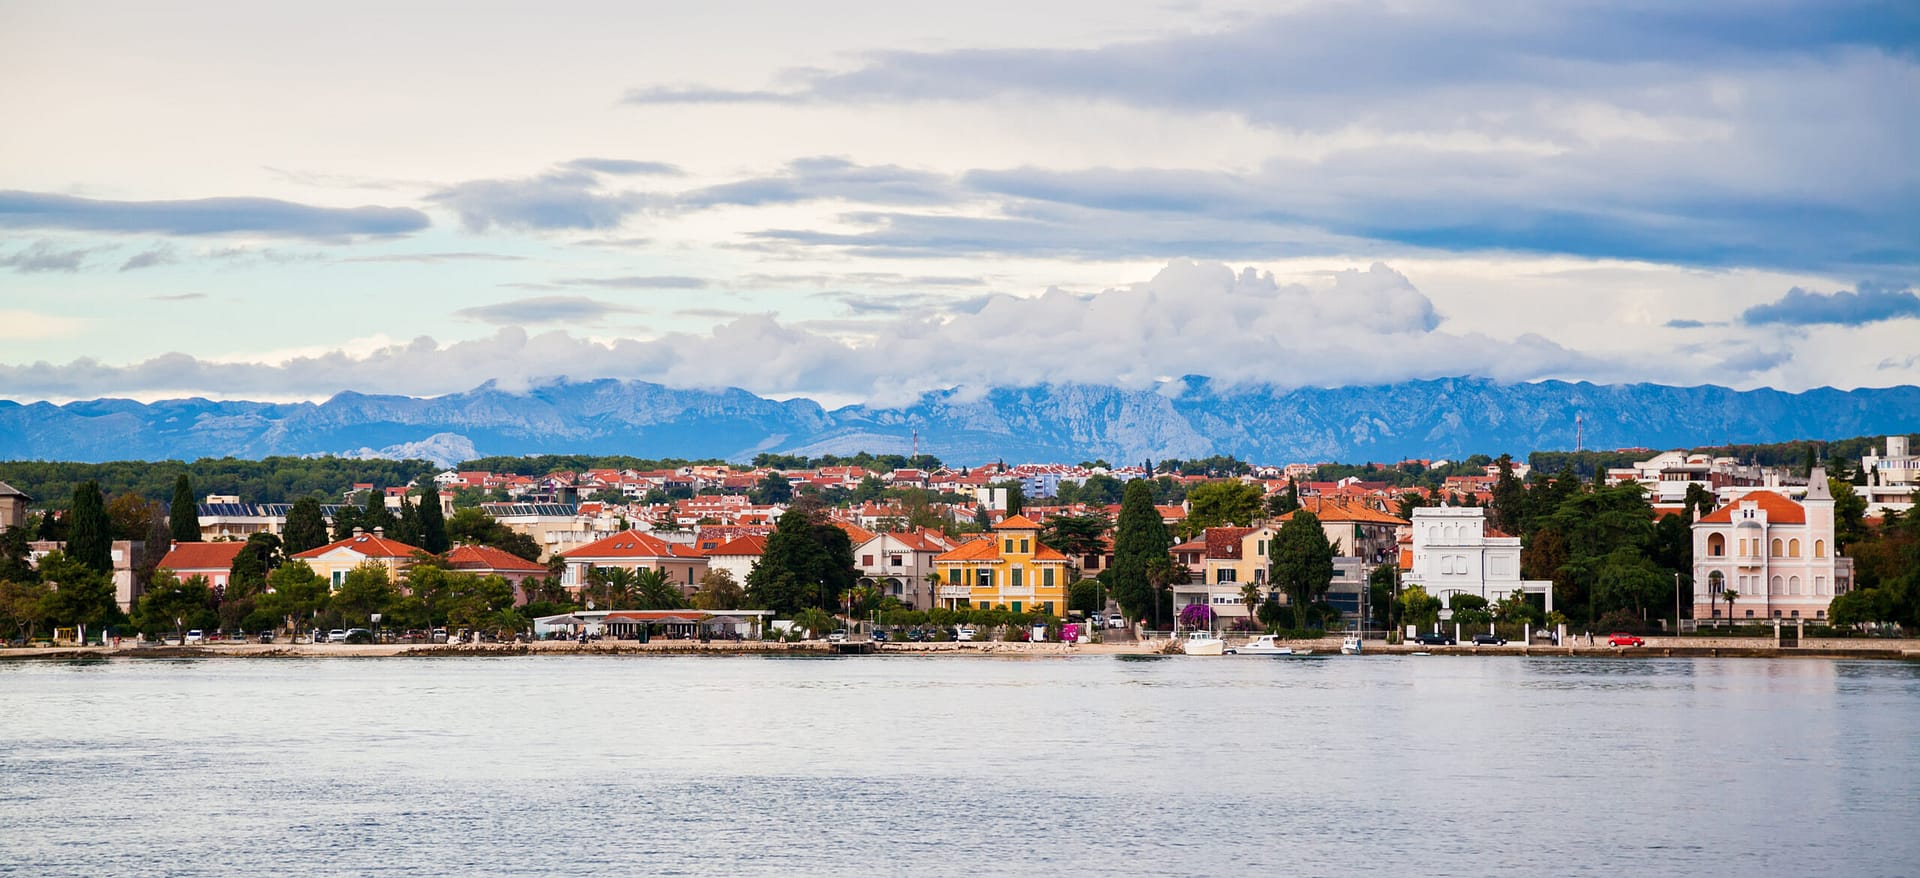 Zadar waterfront view with mountains Velebit in a distance, Croatia